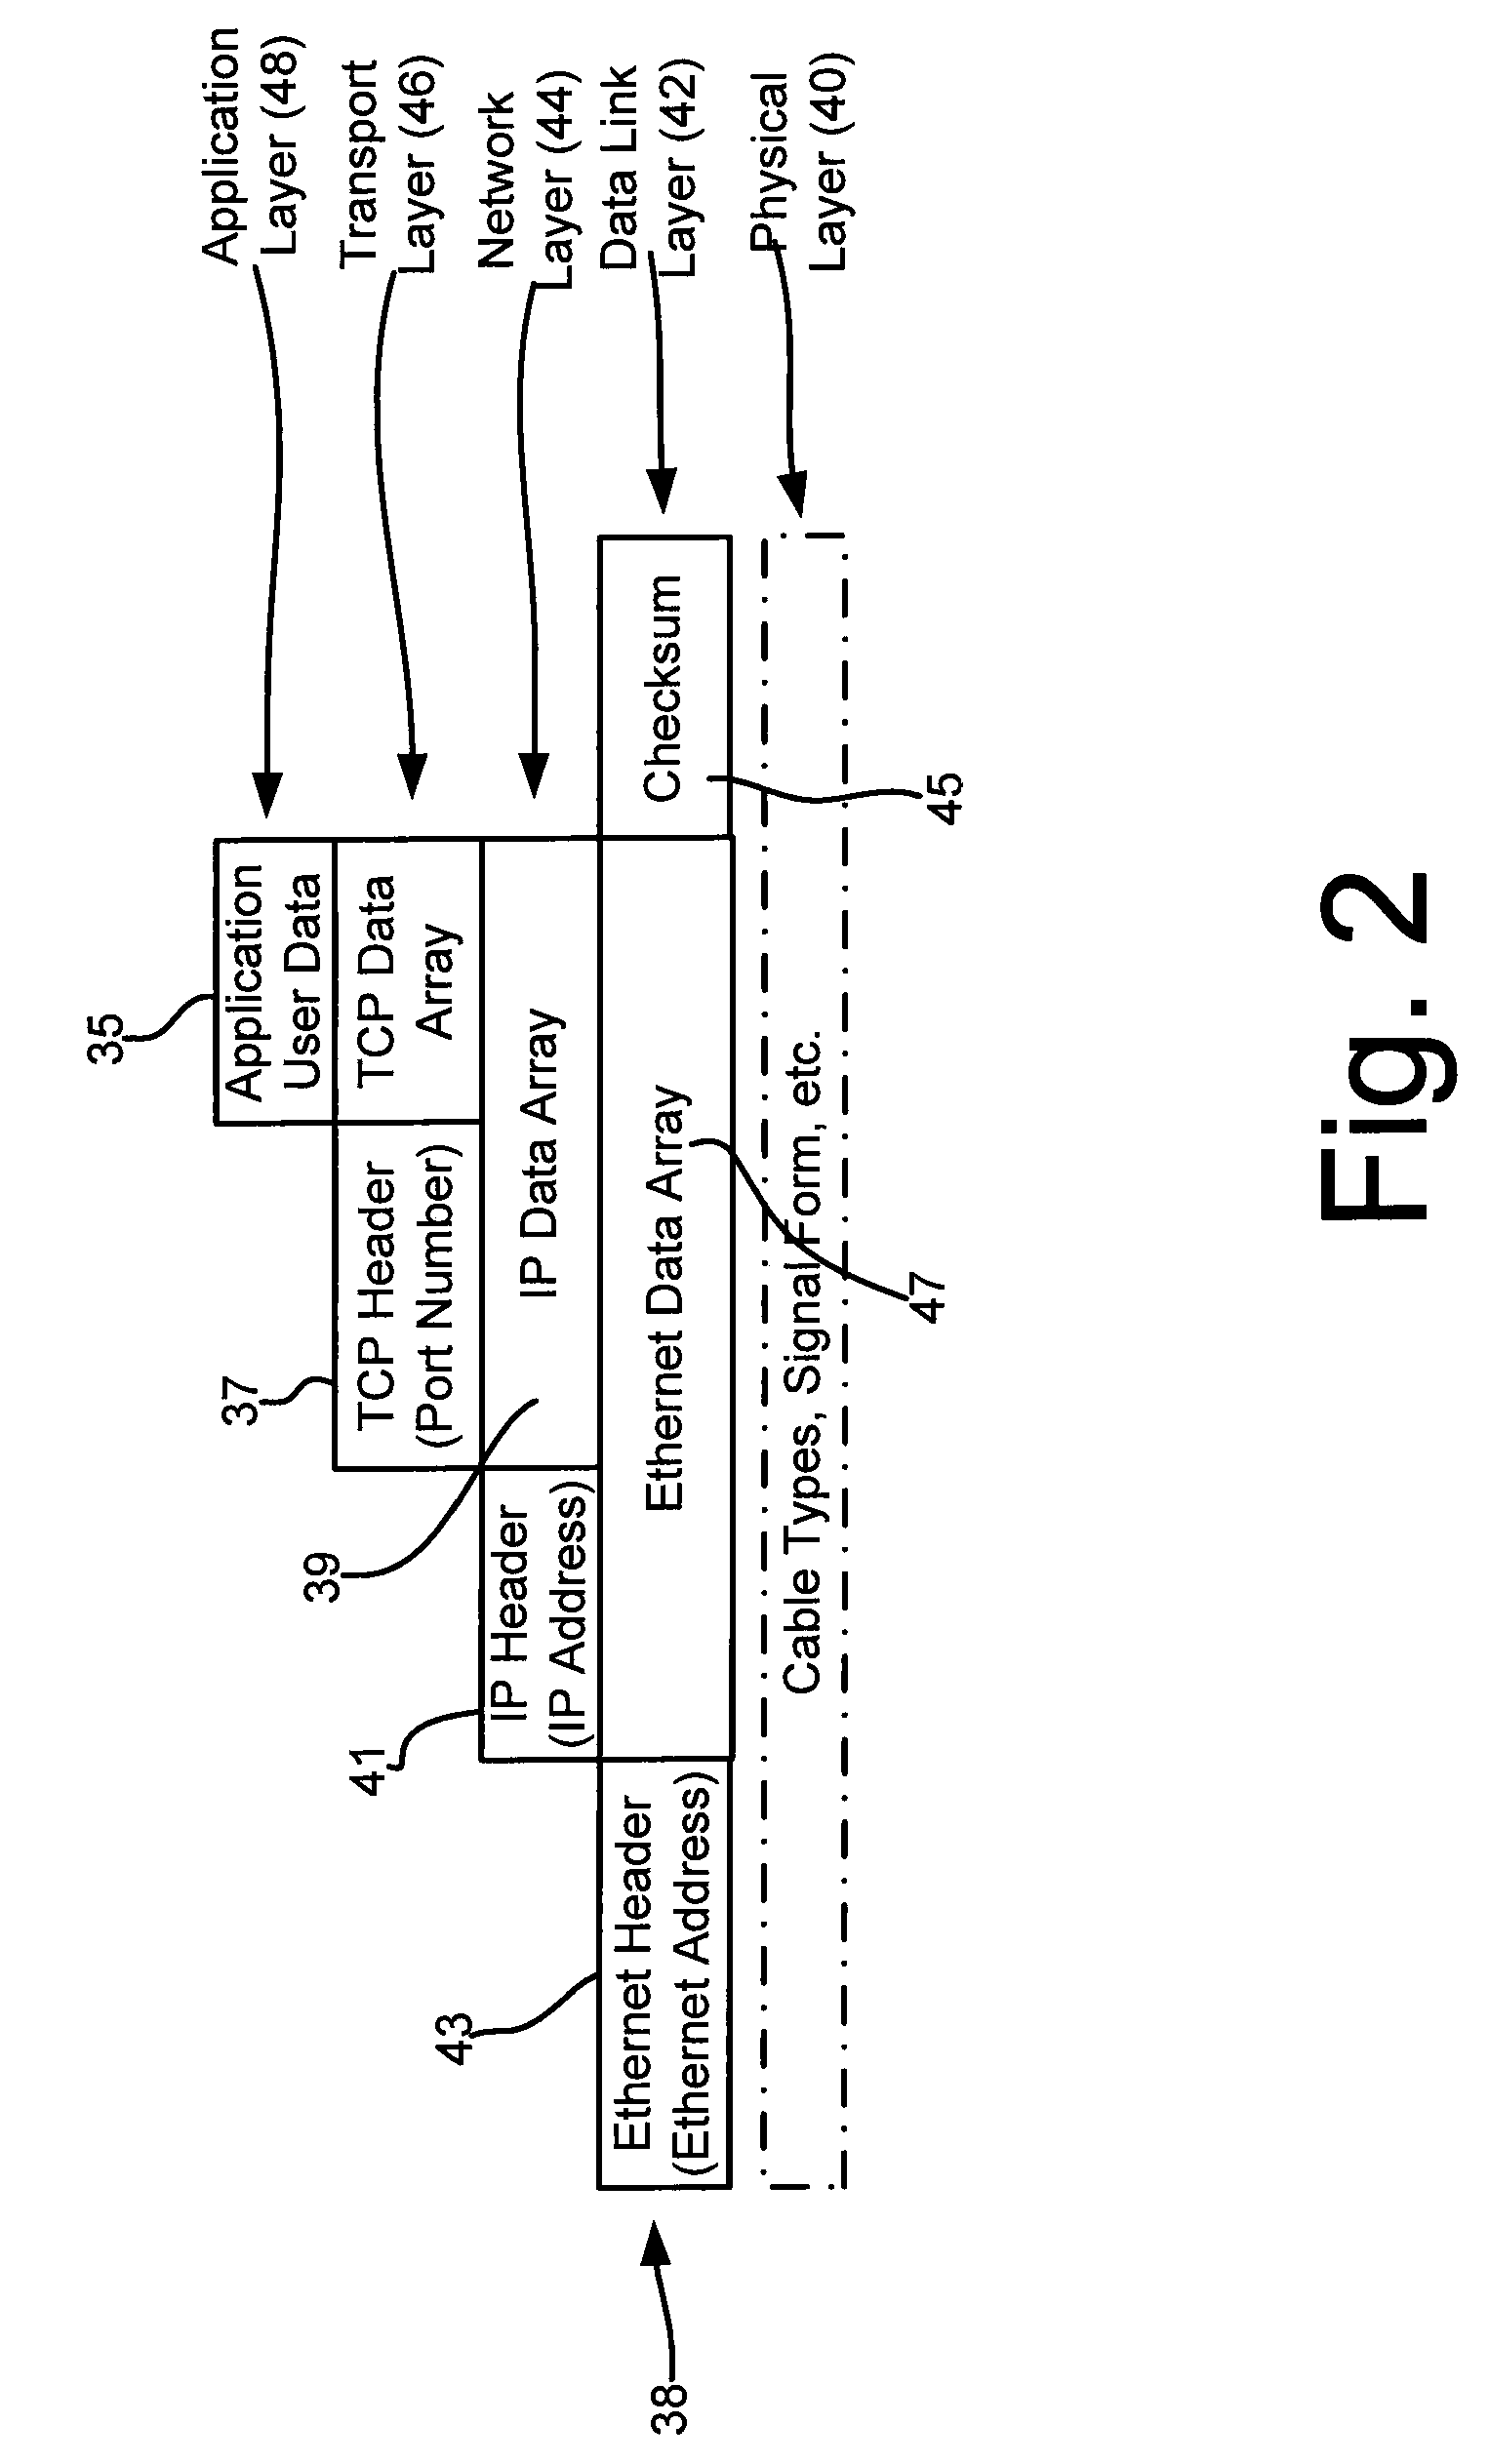 Method and apparatus for communications accelerator on cip motion networks